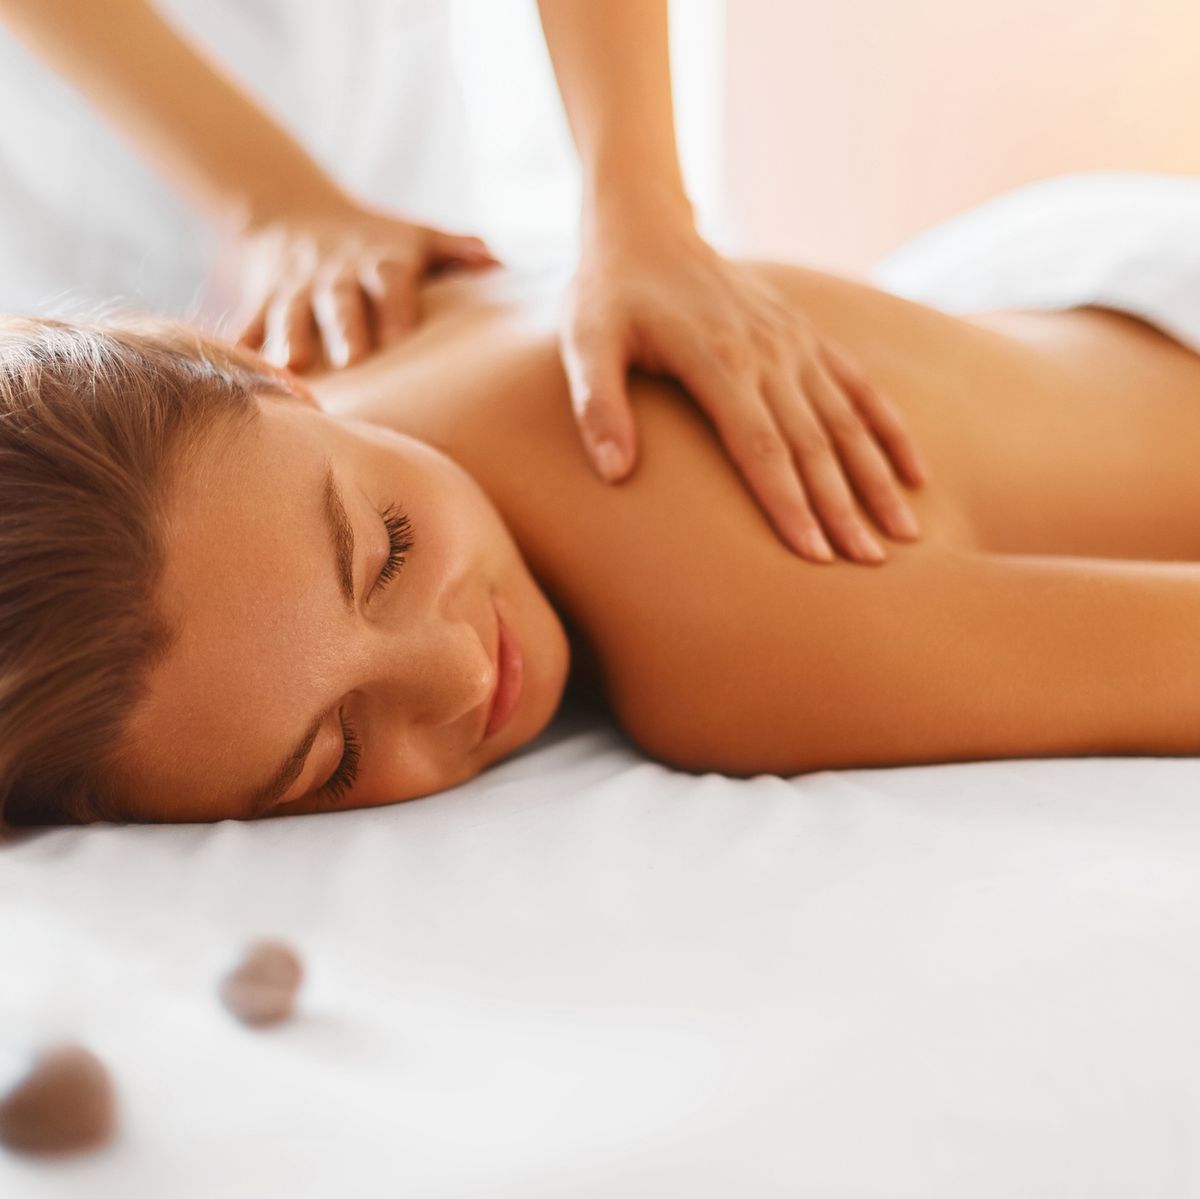 Massage Therapy On-the-Go - Equipment and up-sell ideas